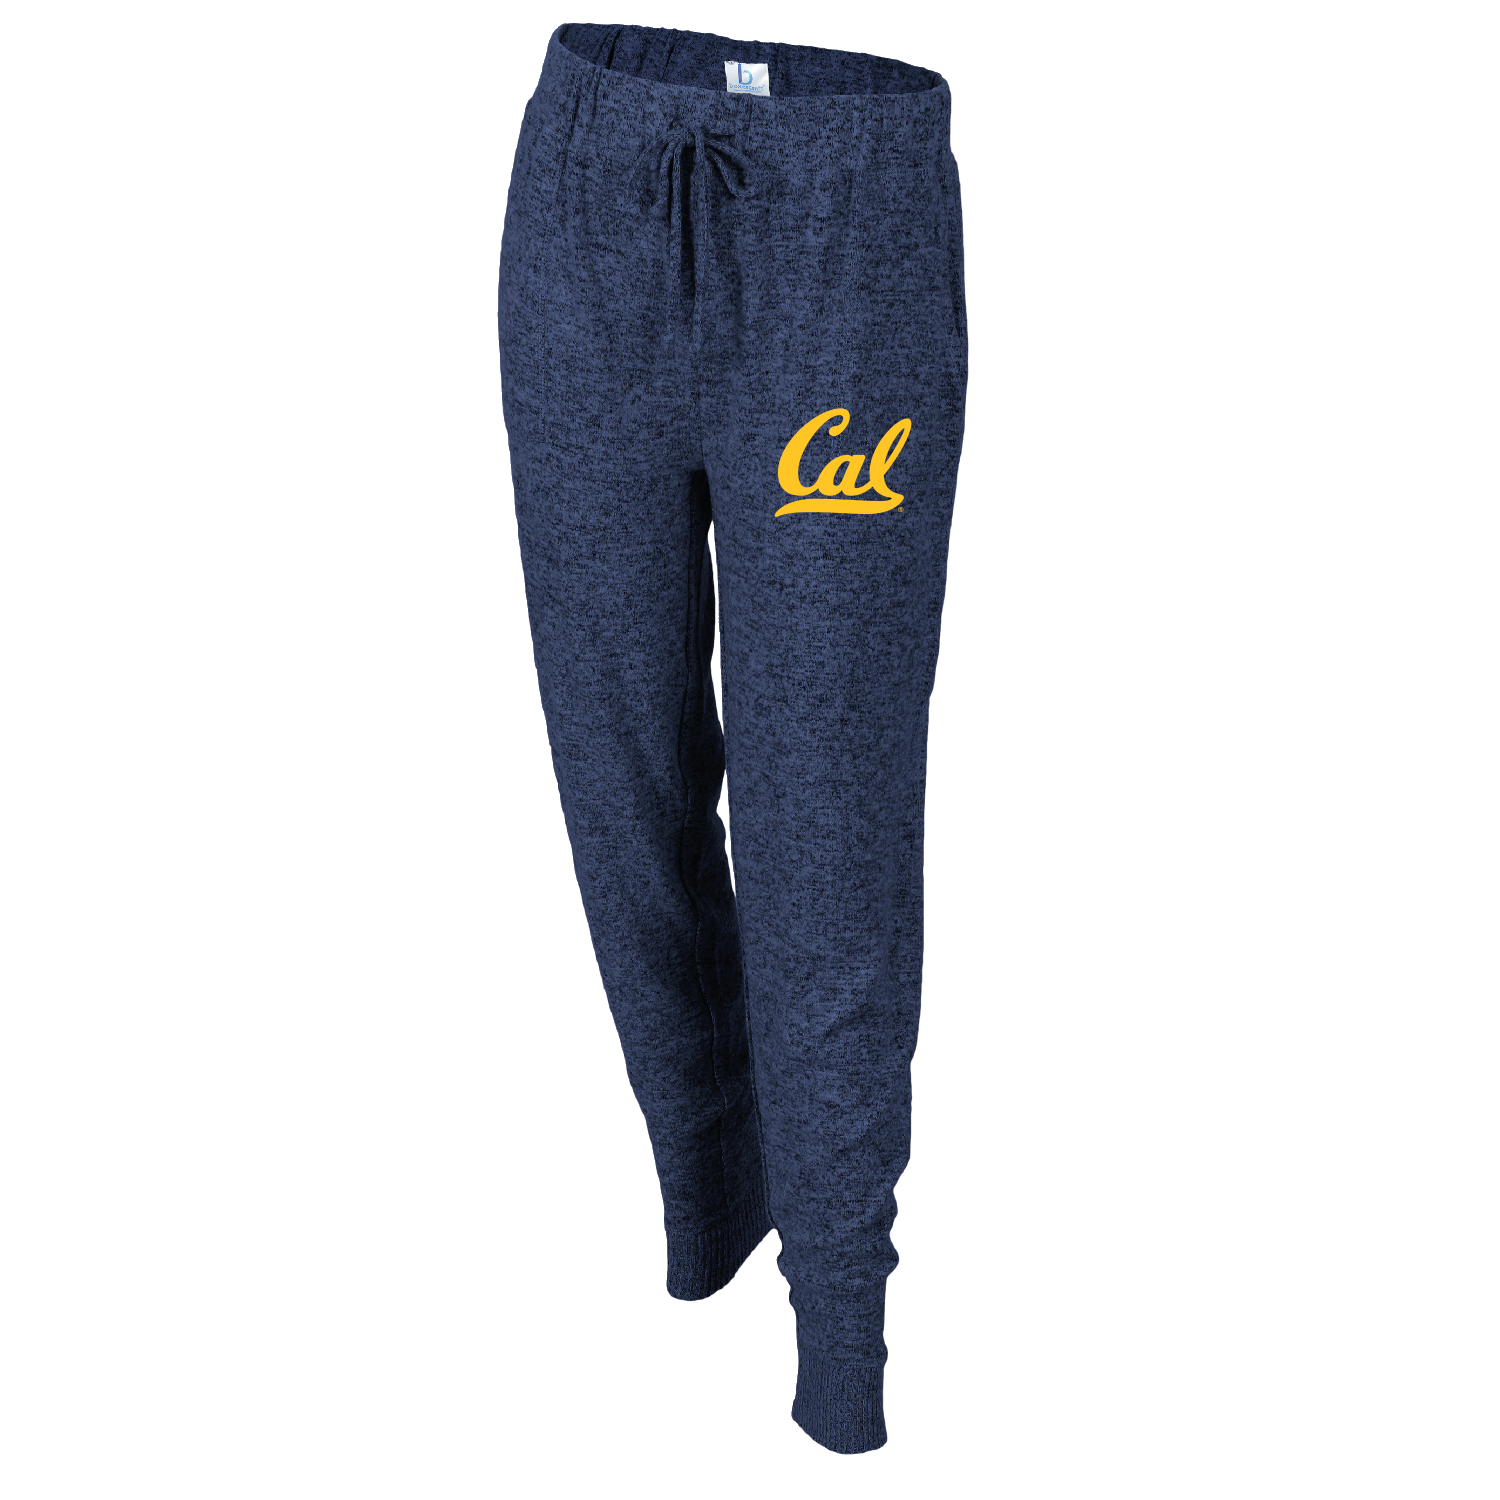 U.C. Berkeley Cal embroidered women's sweater knit cuddle jogger pants-Navy/heather-Shop College Wear